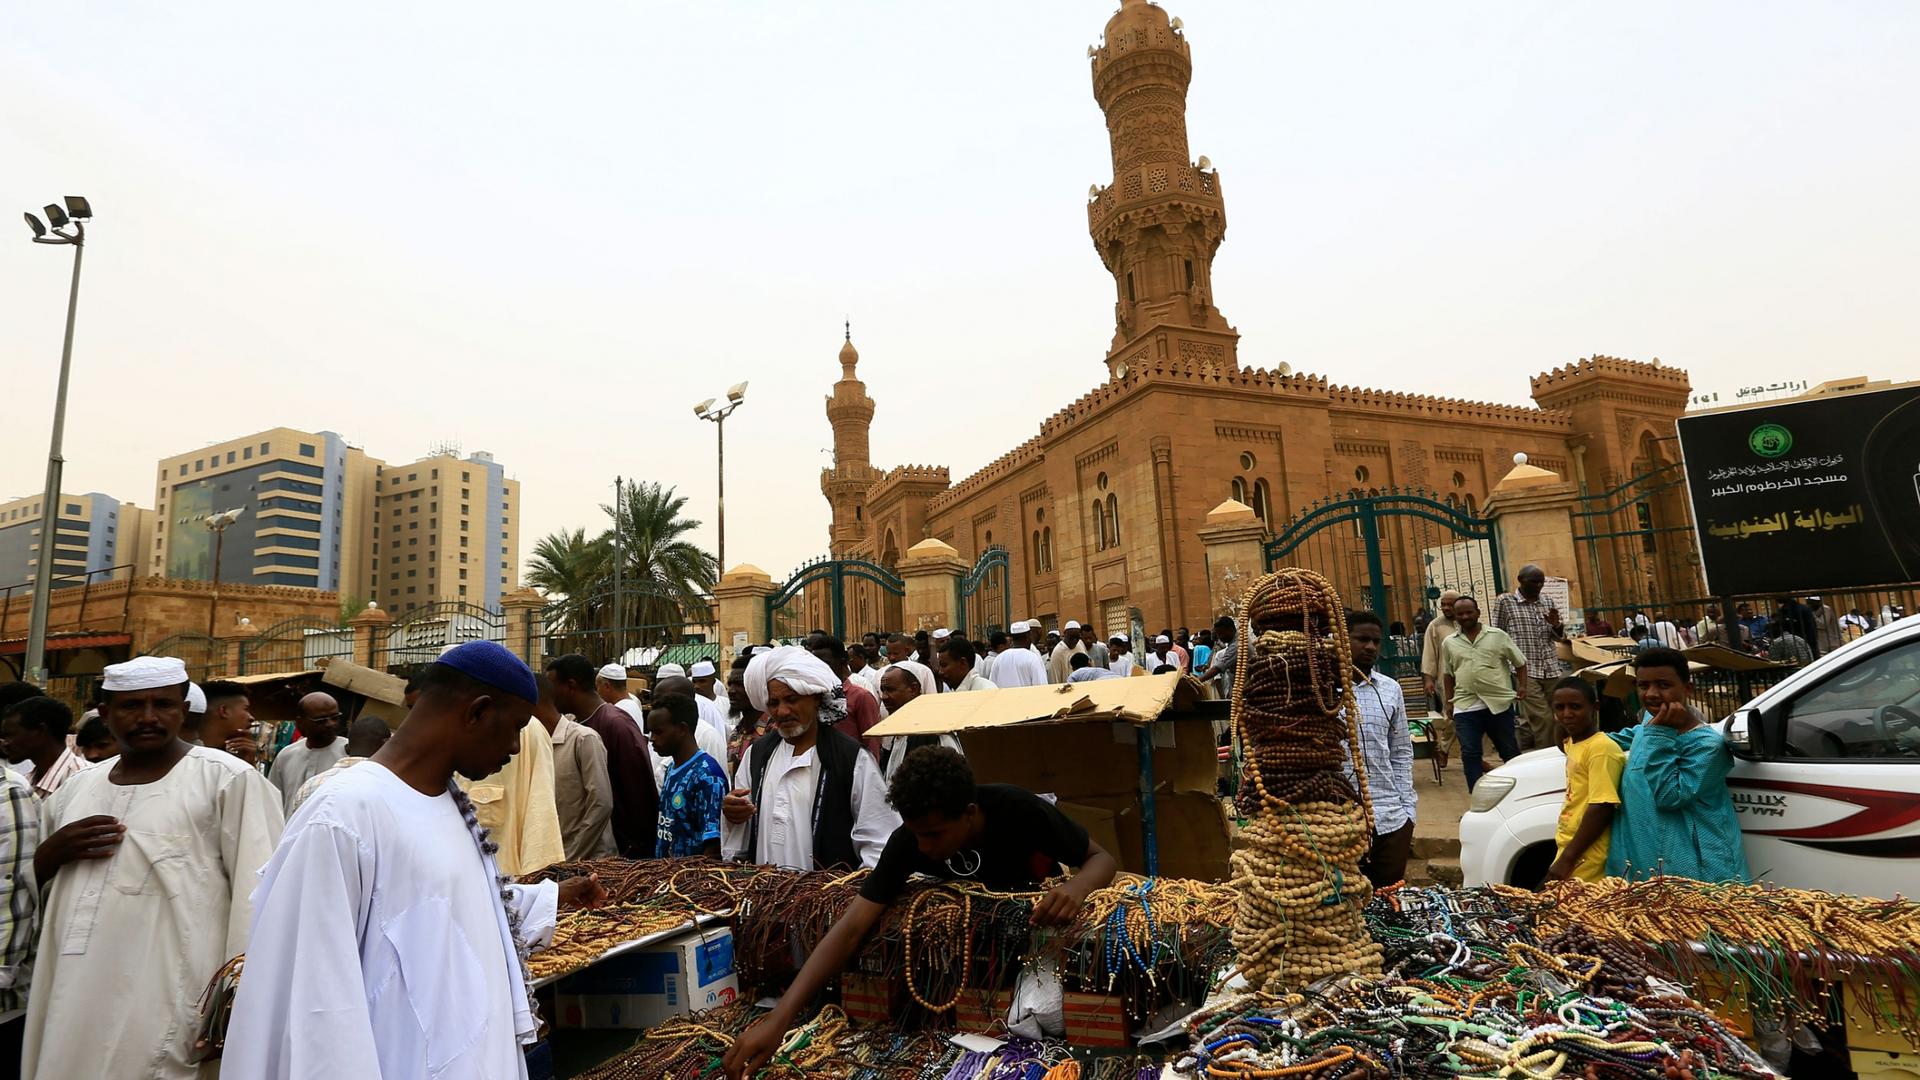 A large crowd od people are shown outside of the tan-colored Grand Mosque with a man selling beaded jewelry in the nearground.